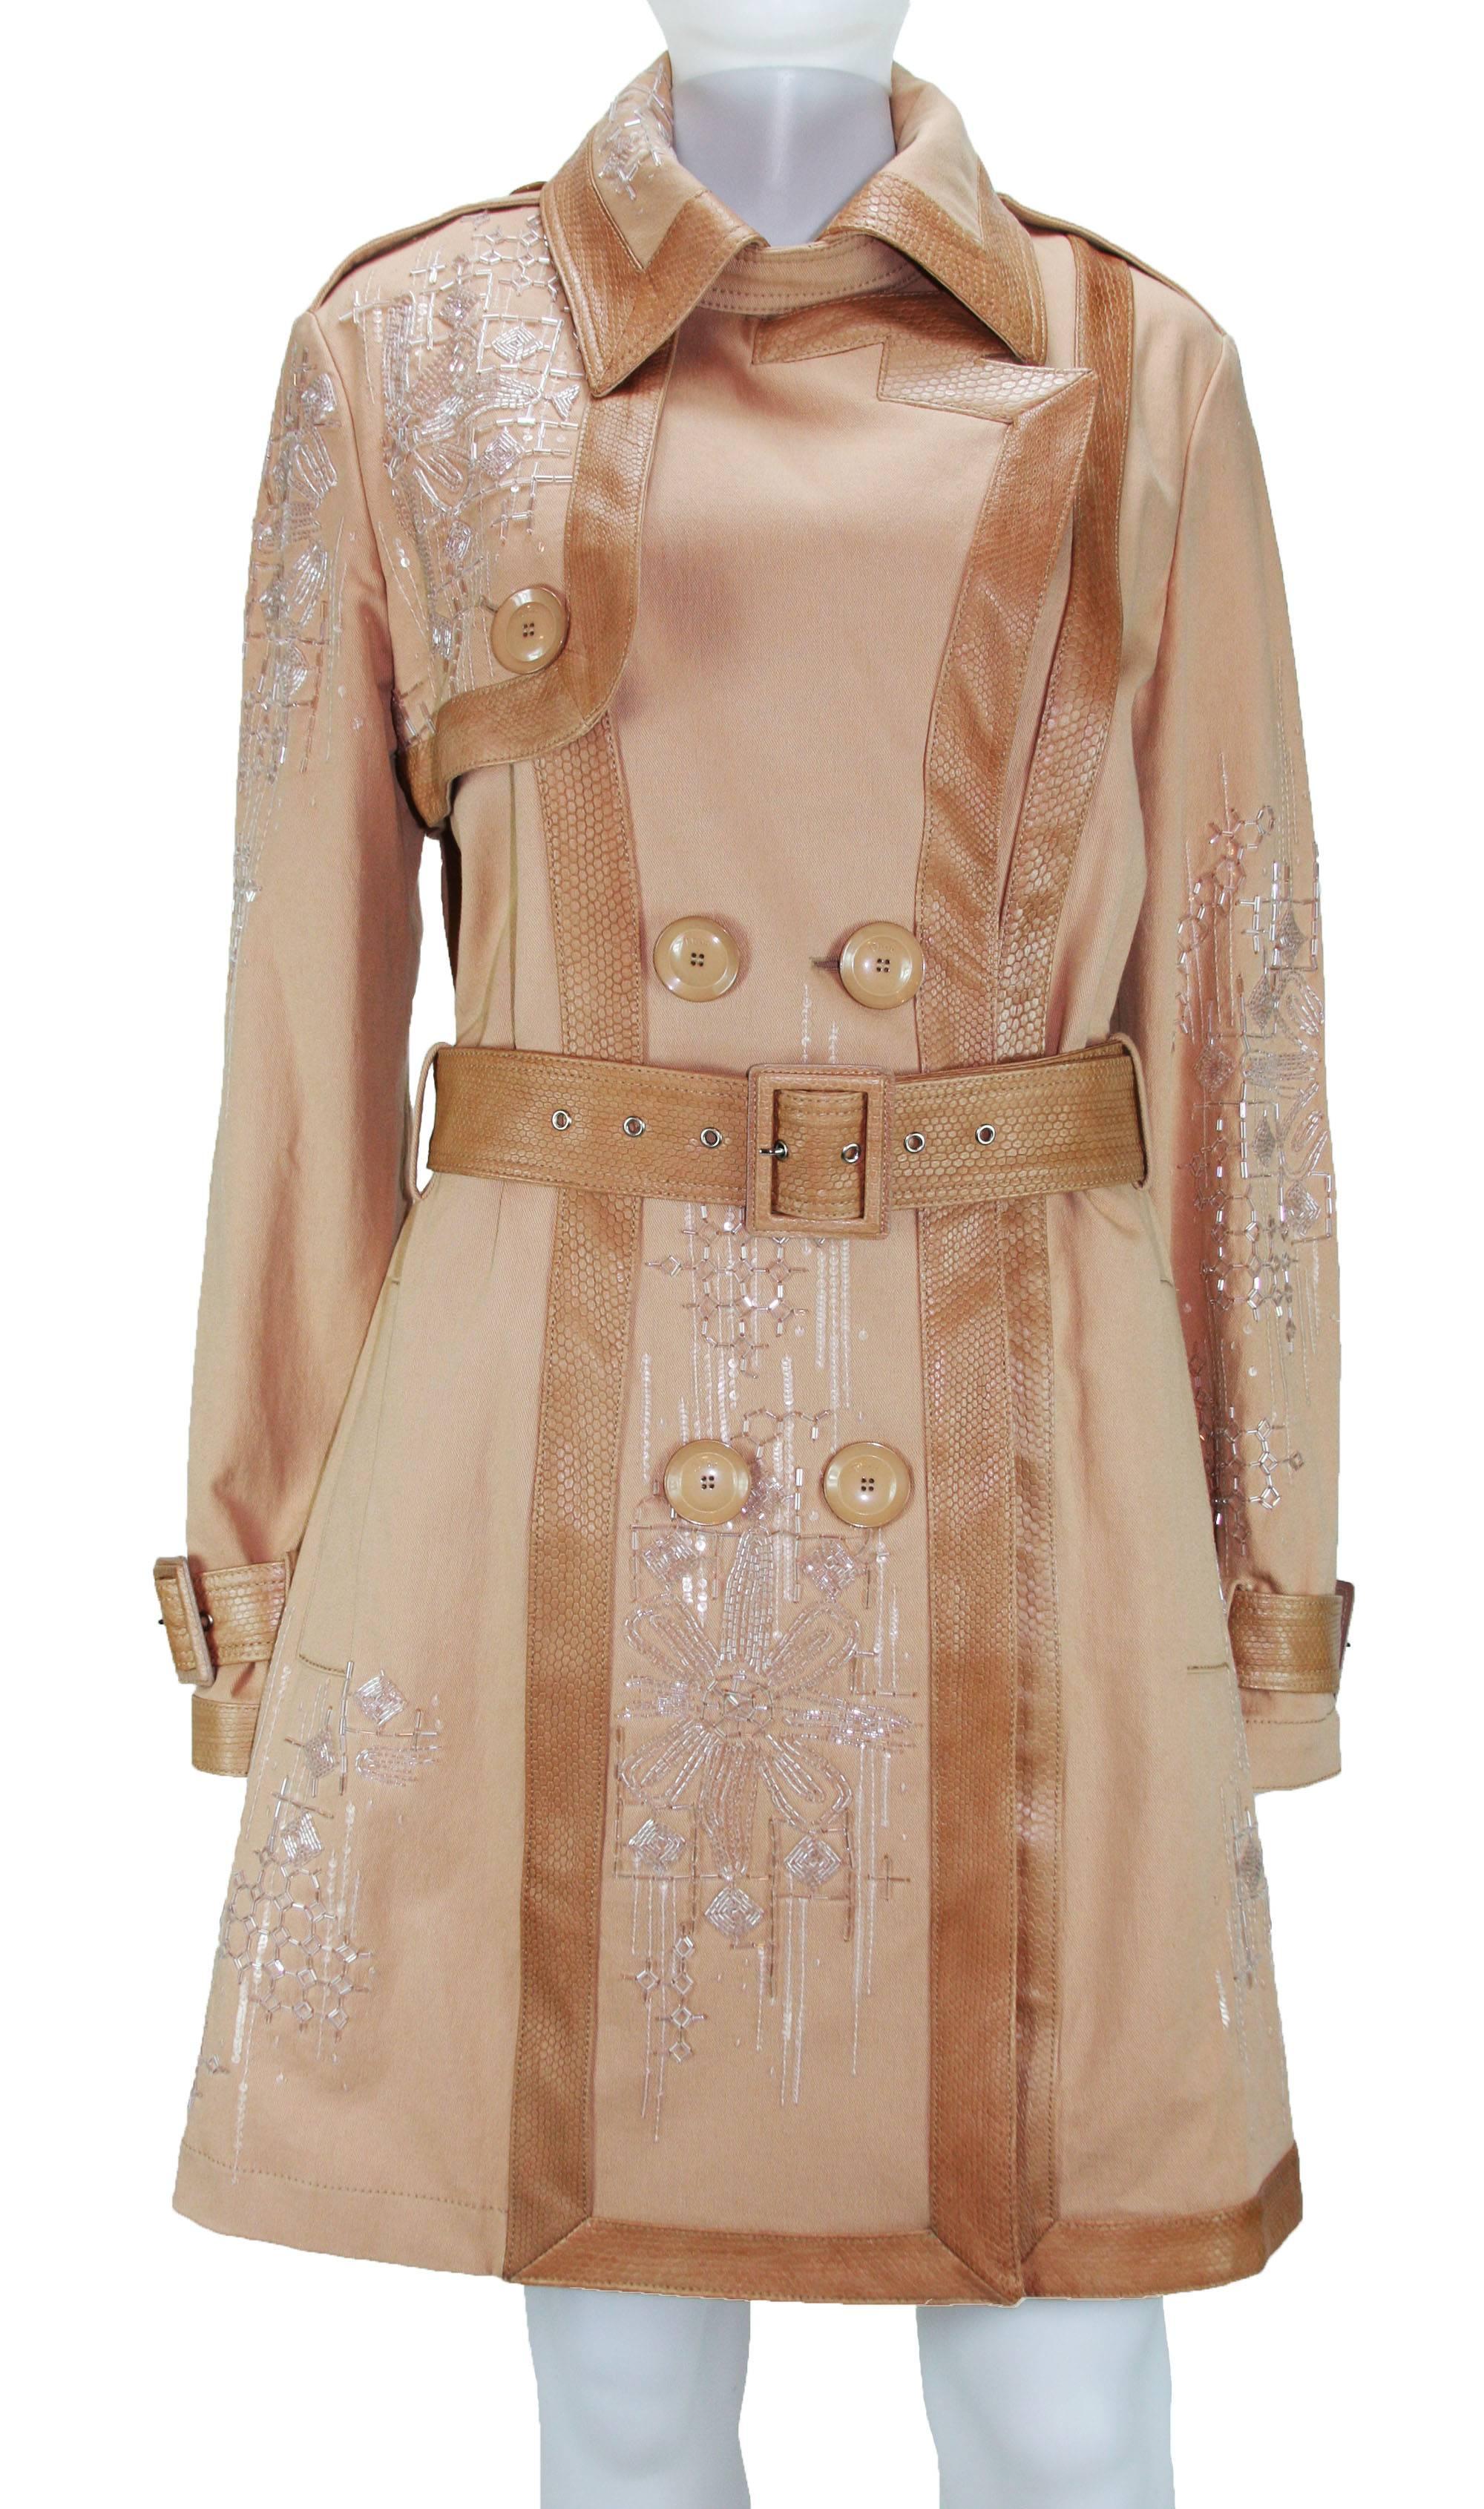 Christian Dior Embellished Trench Coat
Christian Dior Boutique 
FR size 40 - US 8
98% Cotton, 2% Lycra, 100% Snake, Clear Glass Beads.
New without tag.